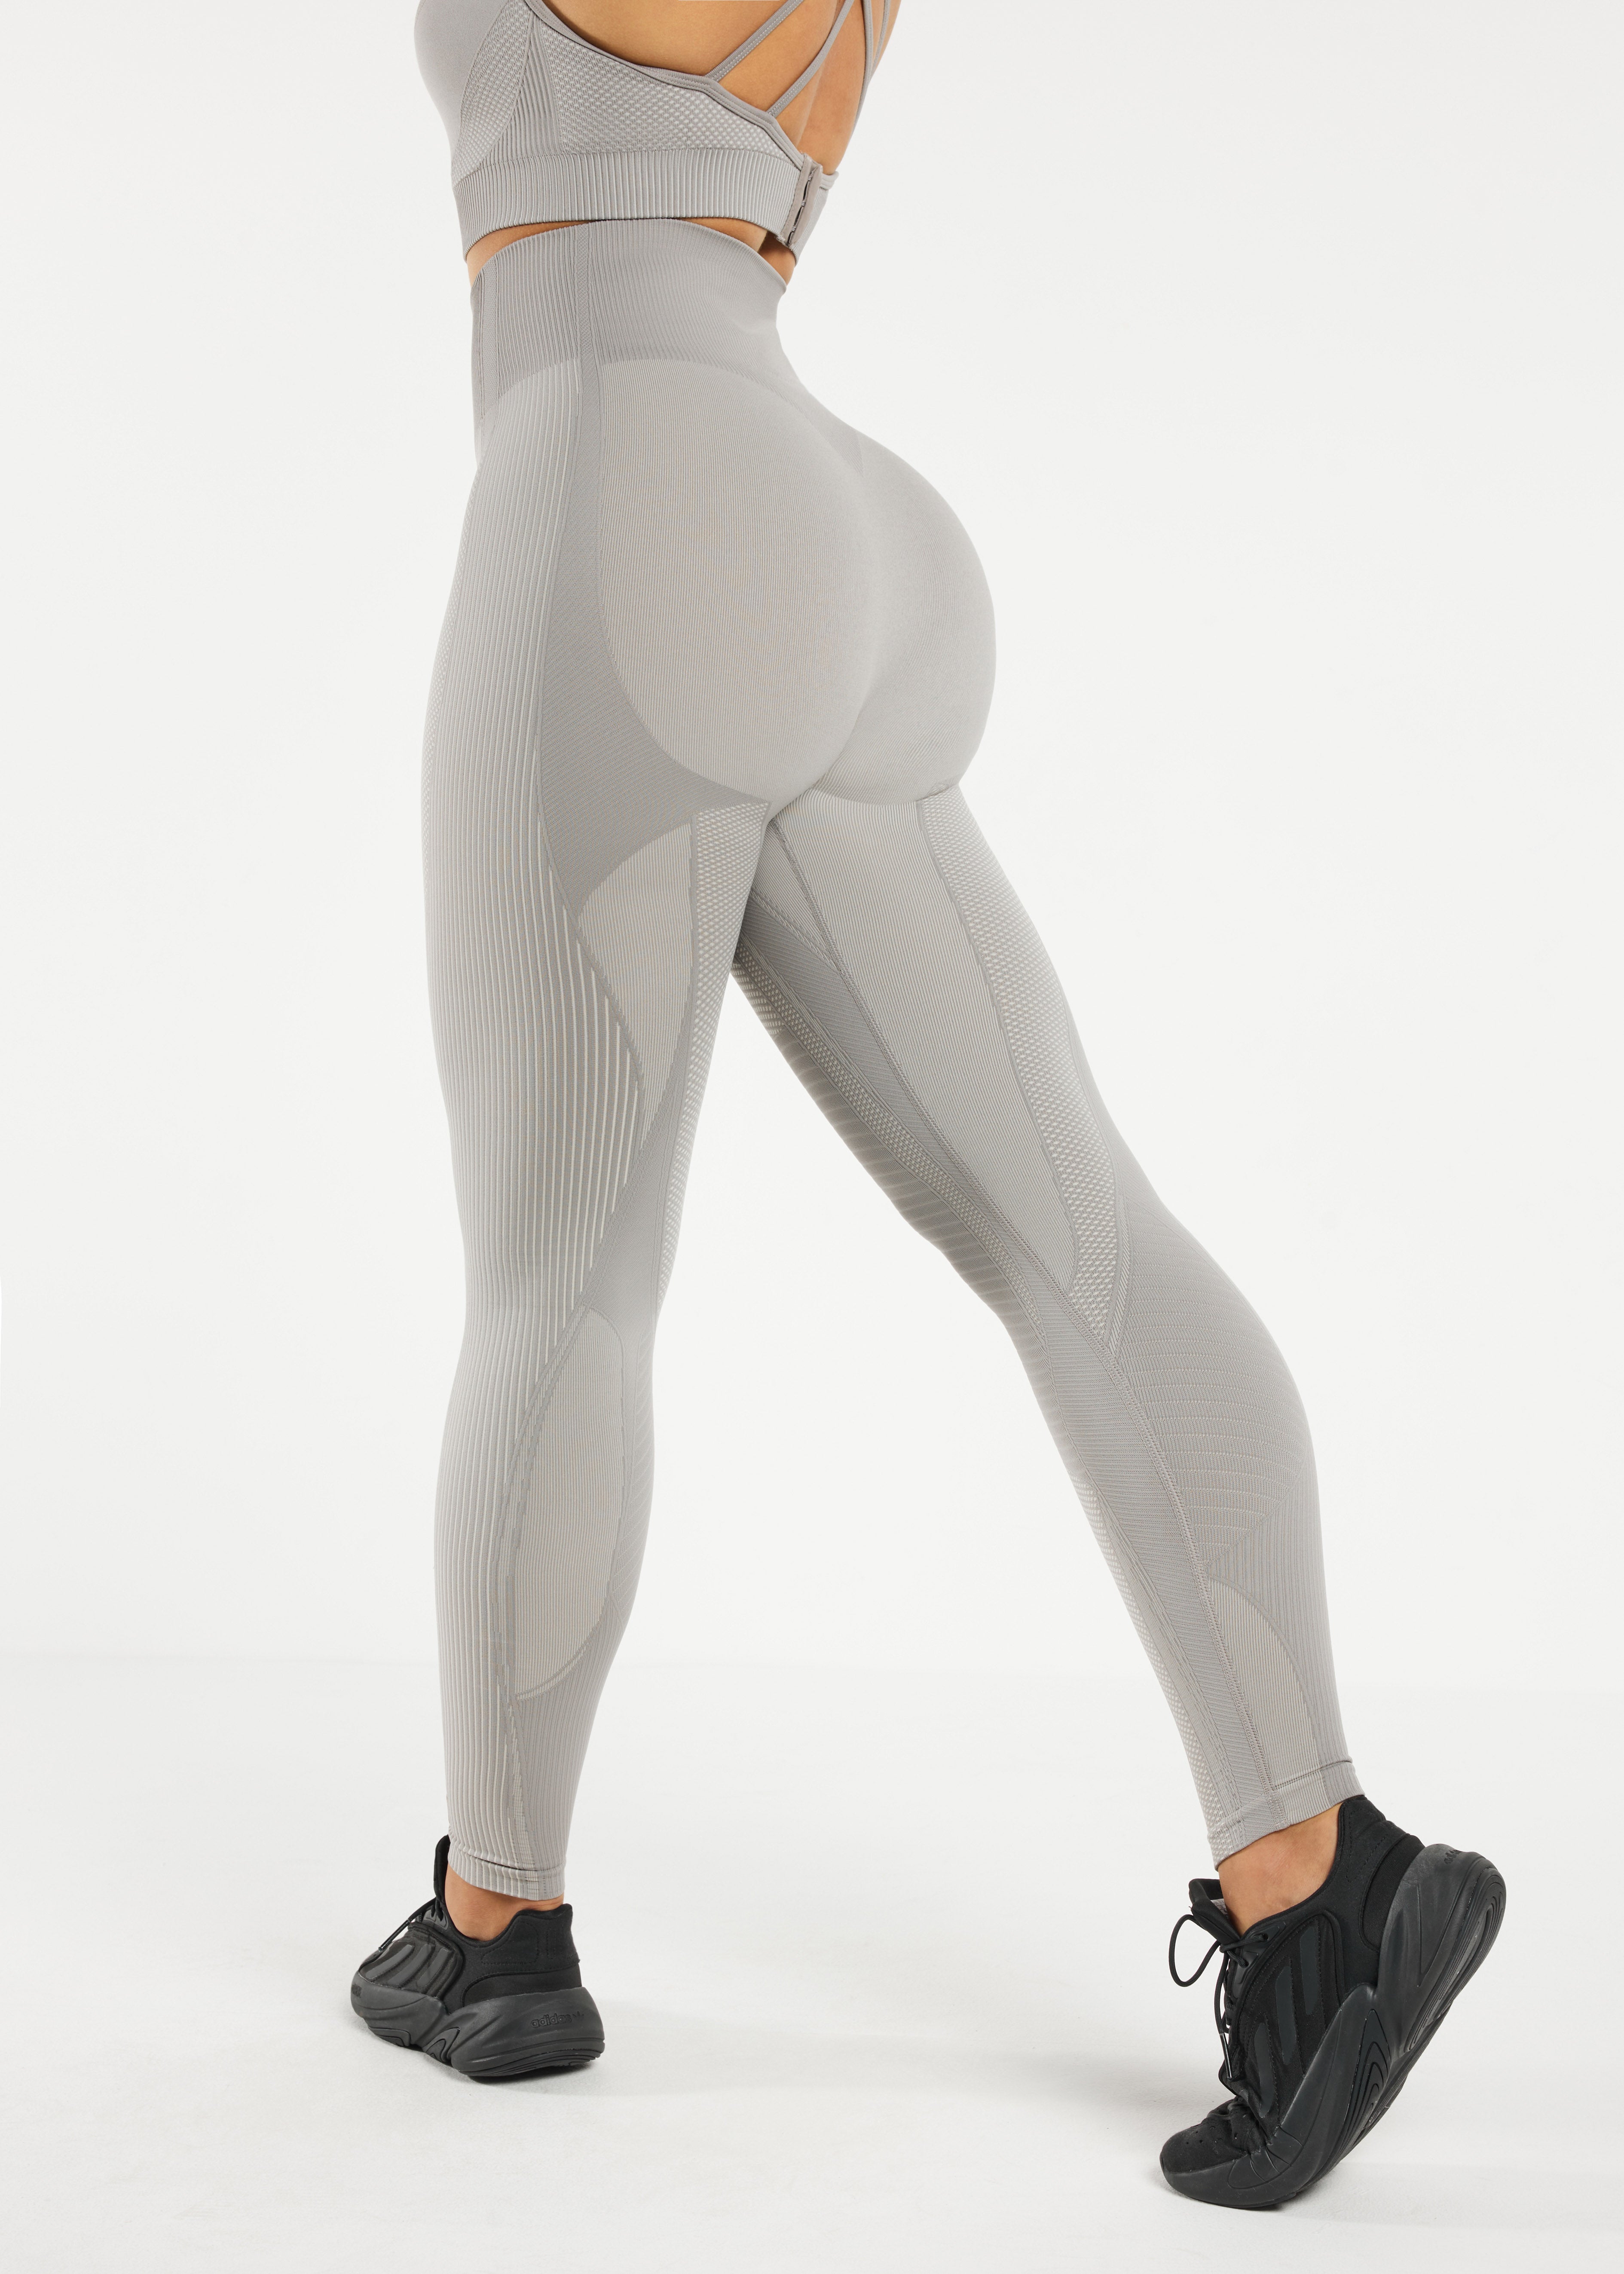 Contrast 27 inch SMLS100© Leggings – The Giving Movement I Active ...